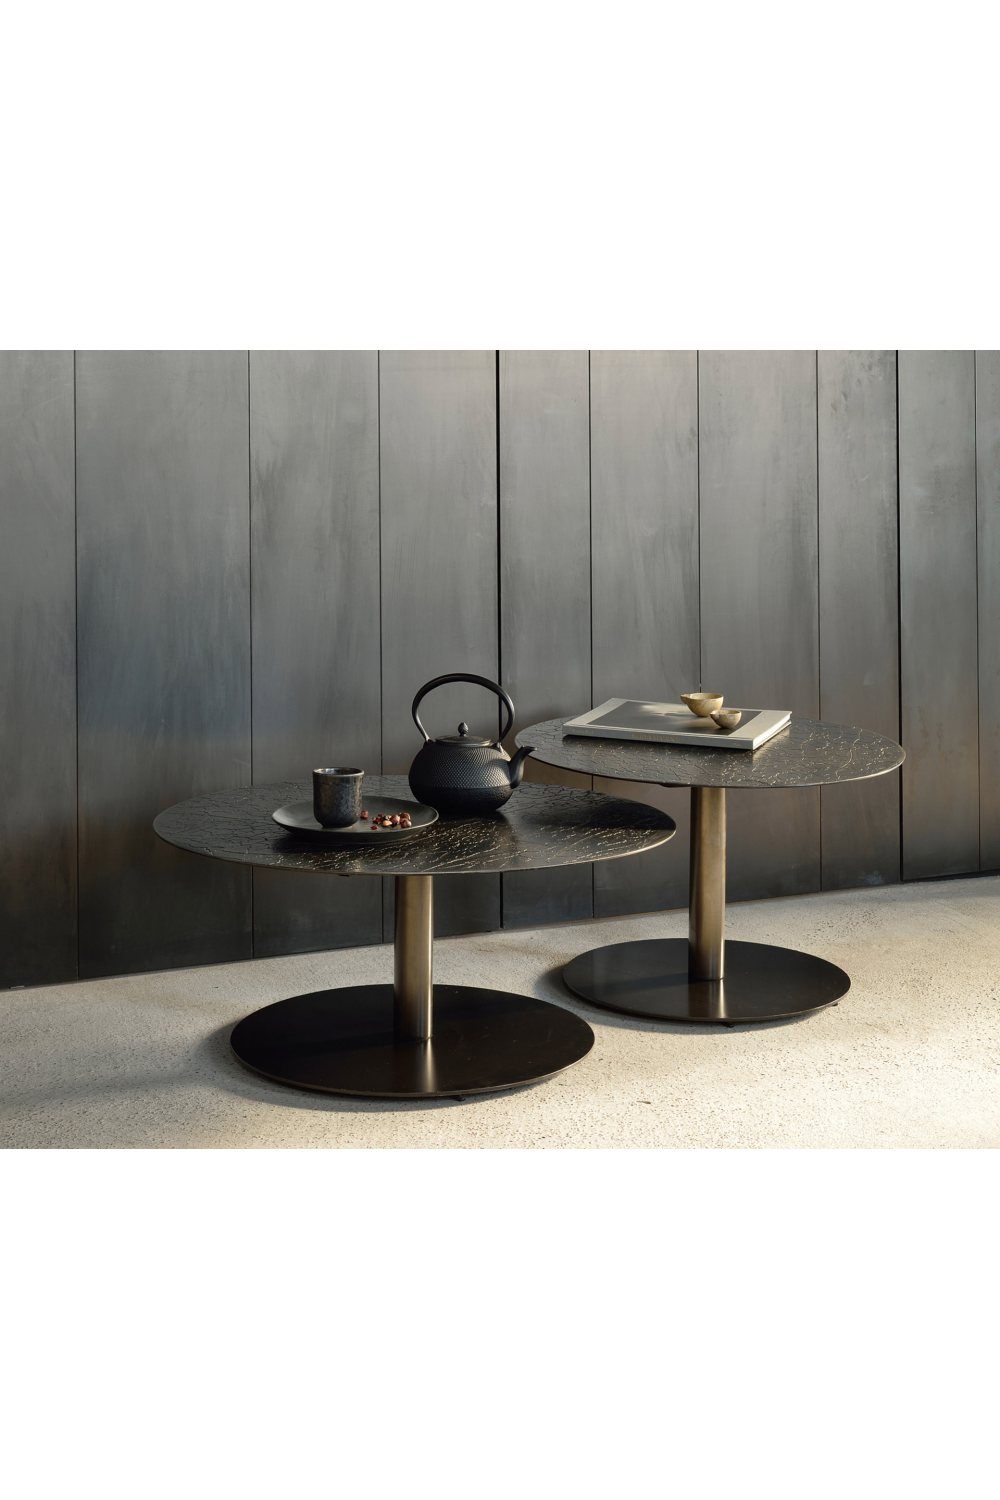 Mineral Round Pedestal Coffee Table | Ethnicraft Sphere | Oroa.com